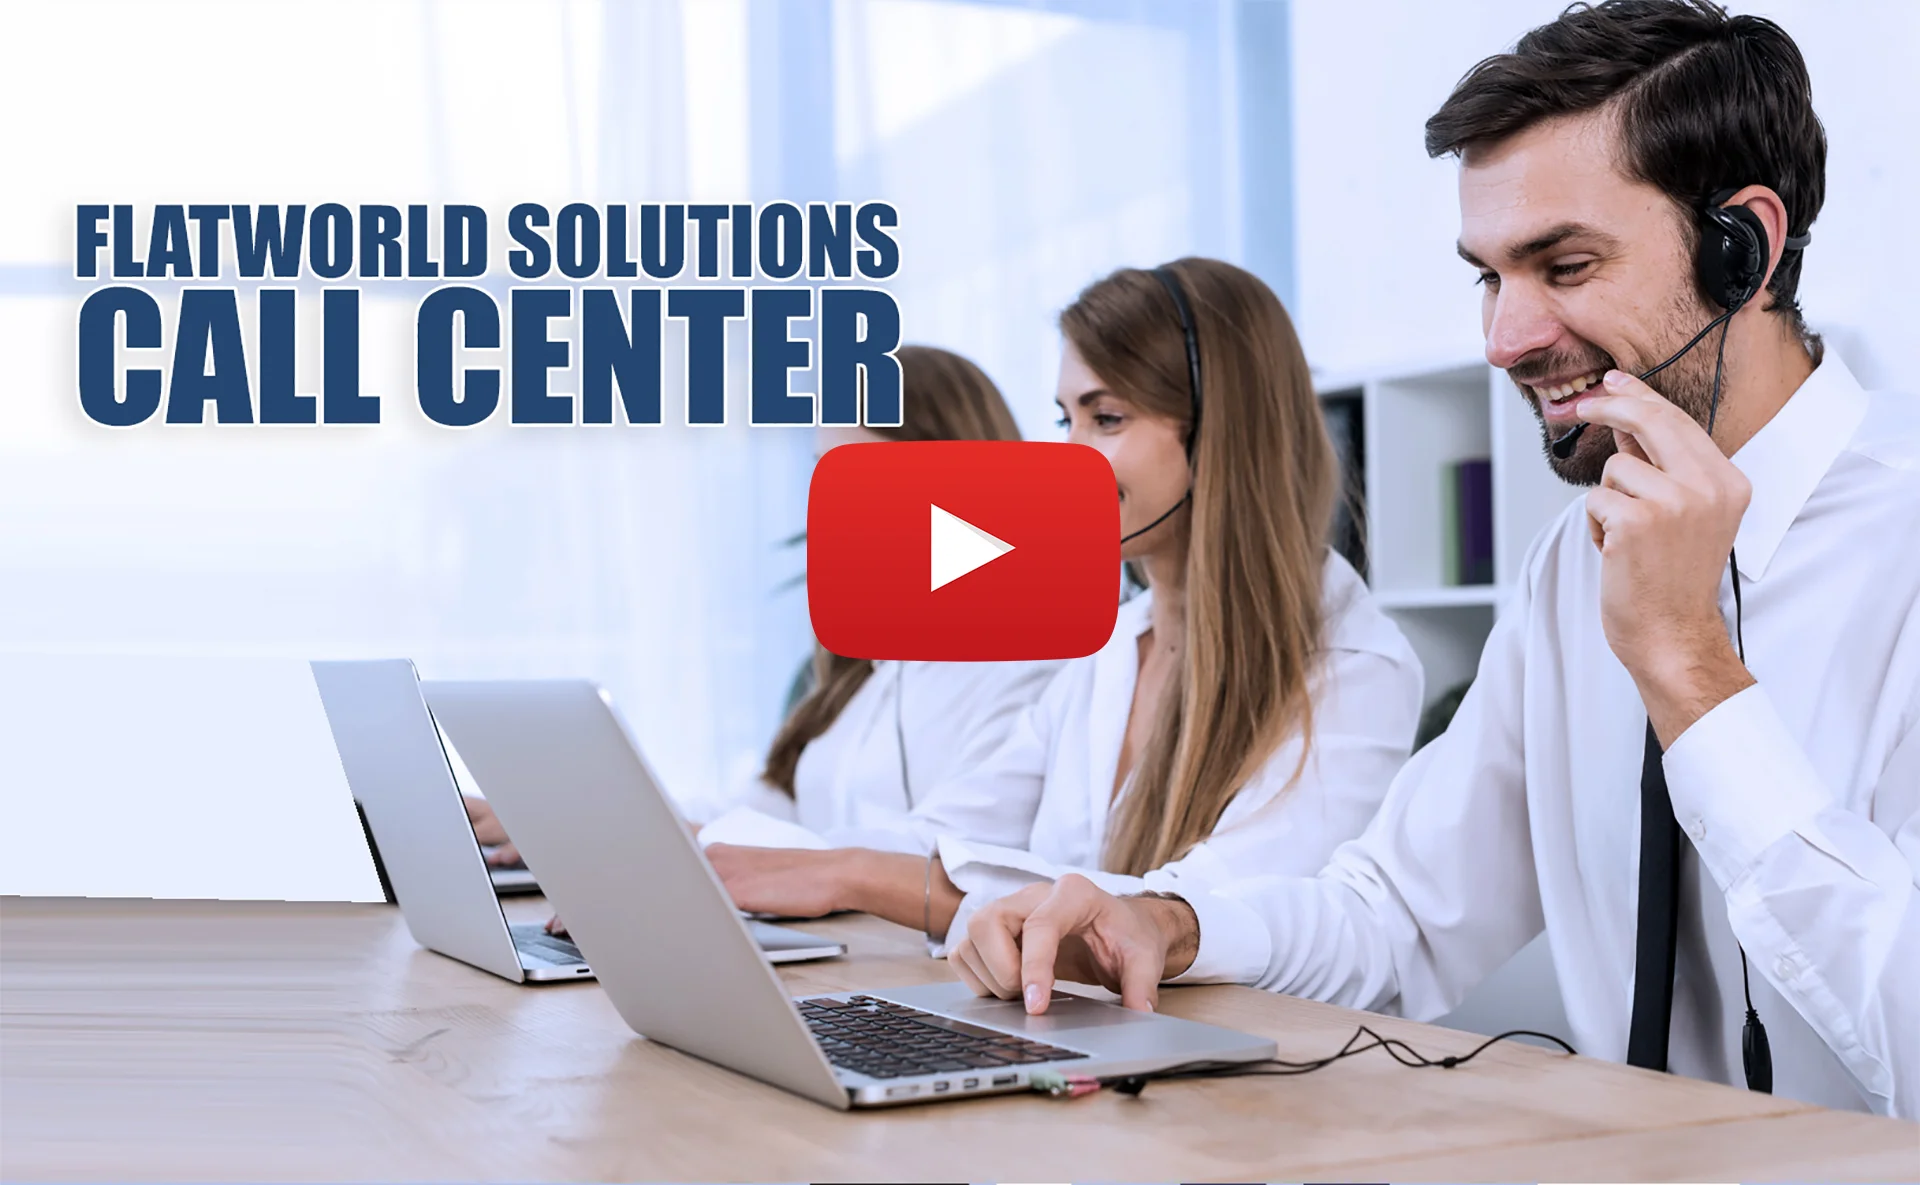 The Flatworld Solution Call Center Corporate Video